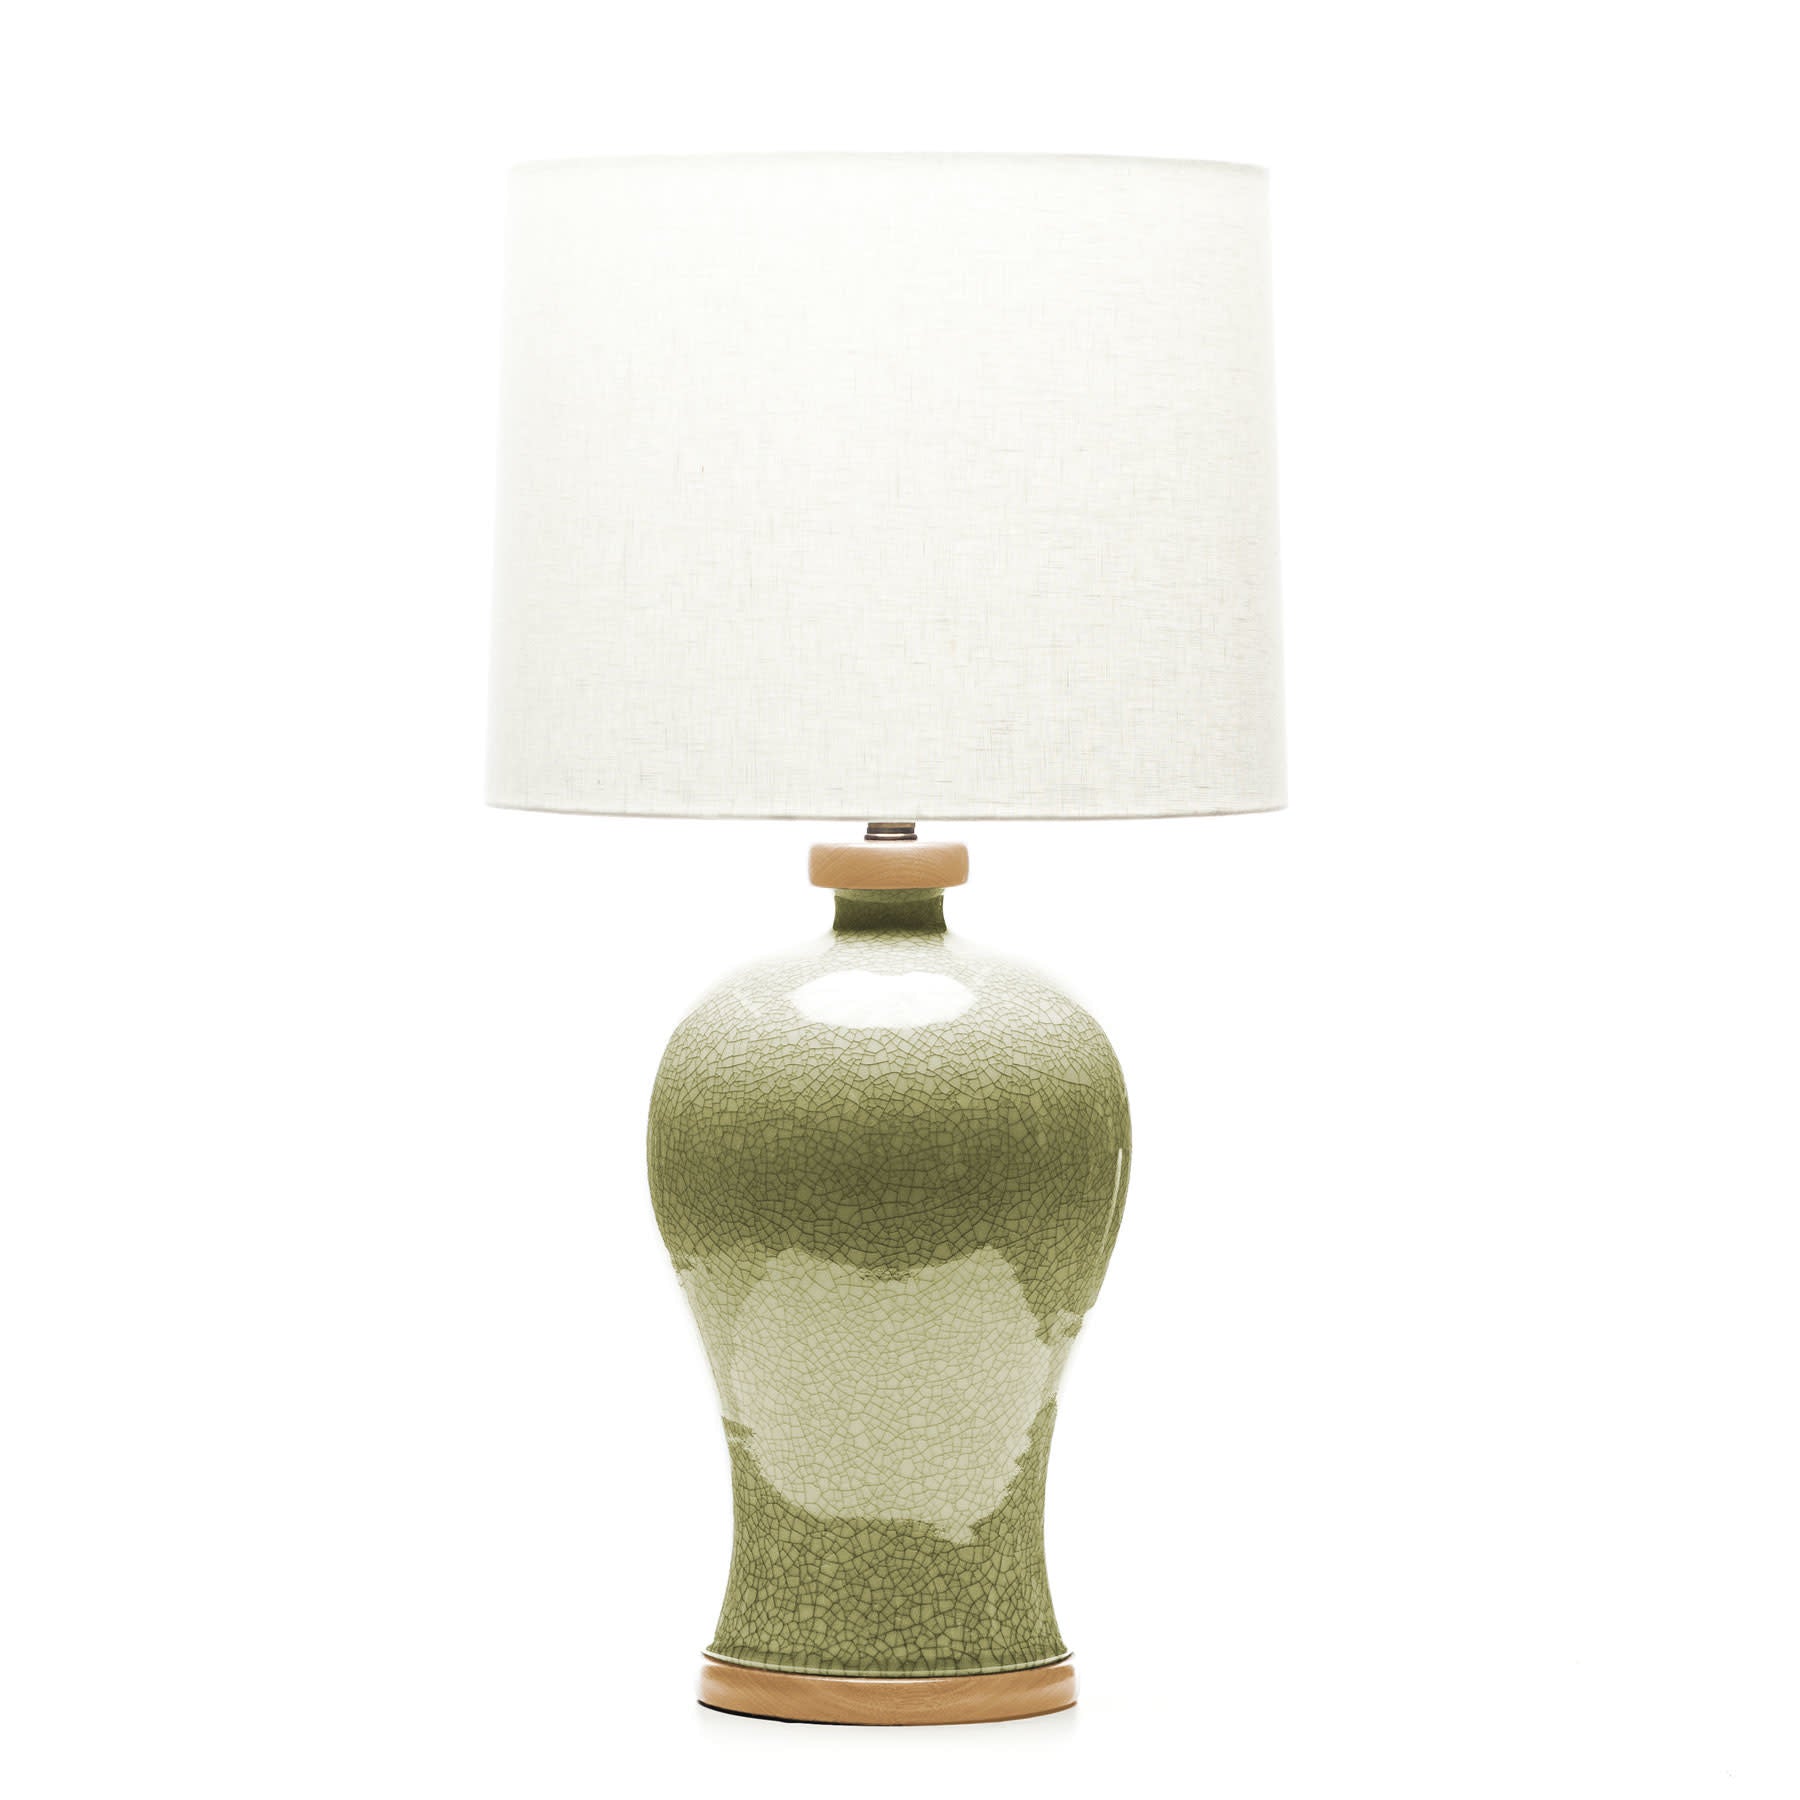 Lawrence & Scott Dashiell Table Lamp in Oyster Crackle with Oak Base